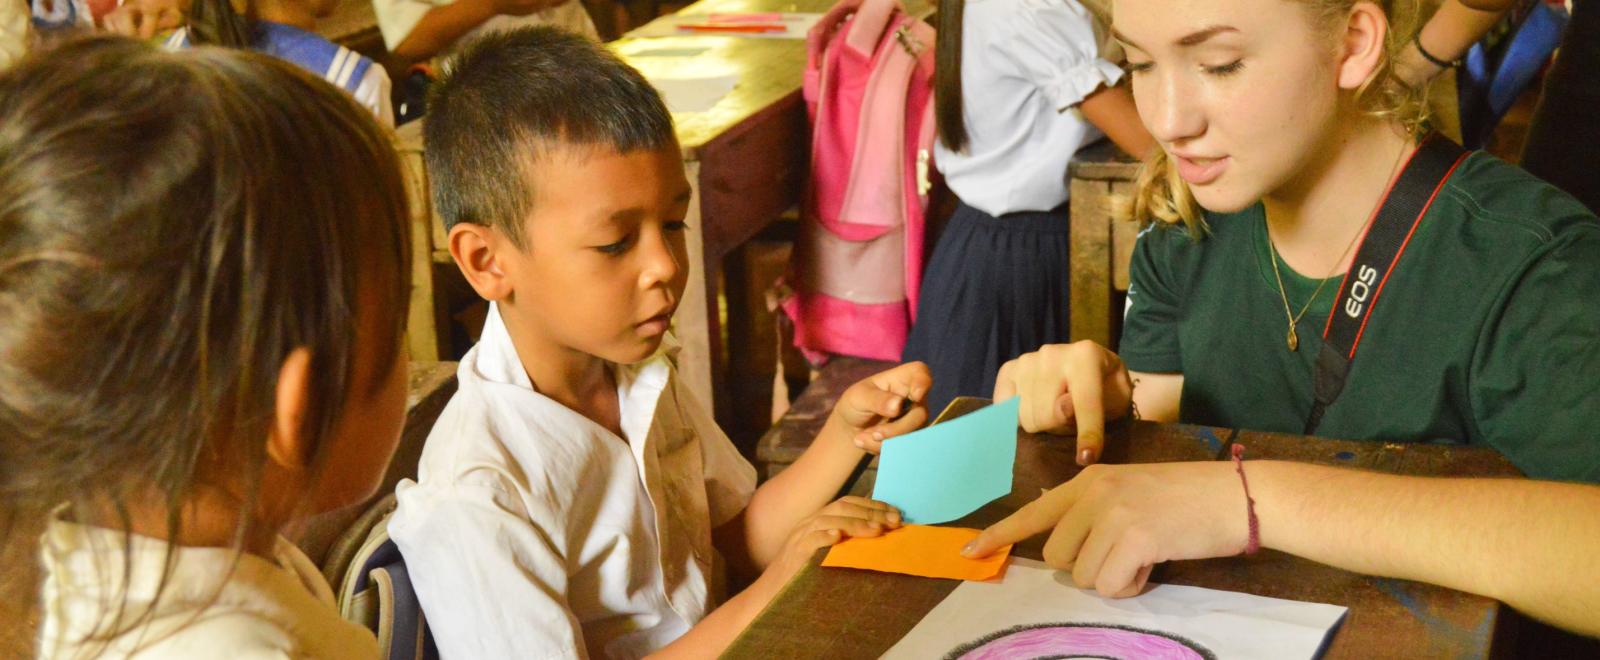 Childcare volunteer teaches a young boy different colours during school in Cambodia